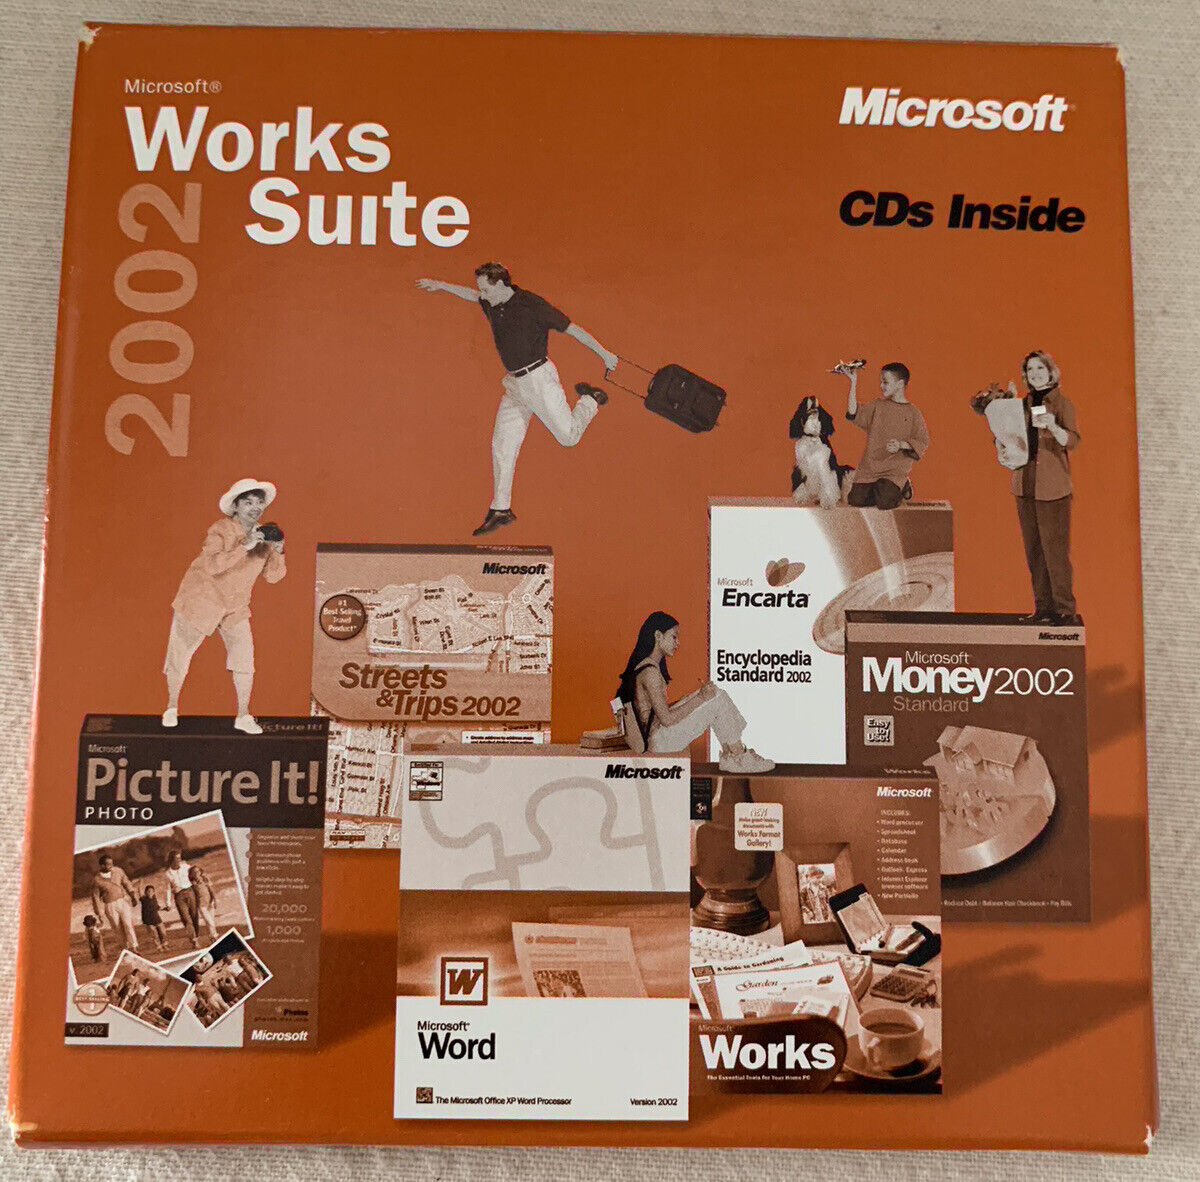 MICROSOFT WORKS SUITE 2002 5 DISC CD-ROM SET, WITH PRODUCT KEY New unopened